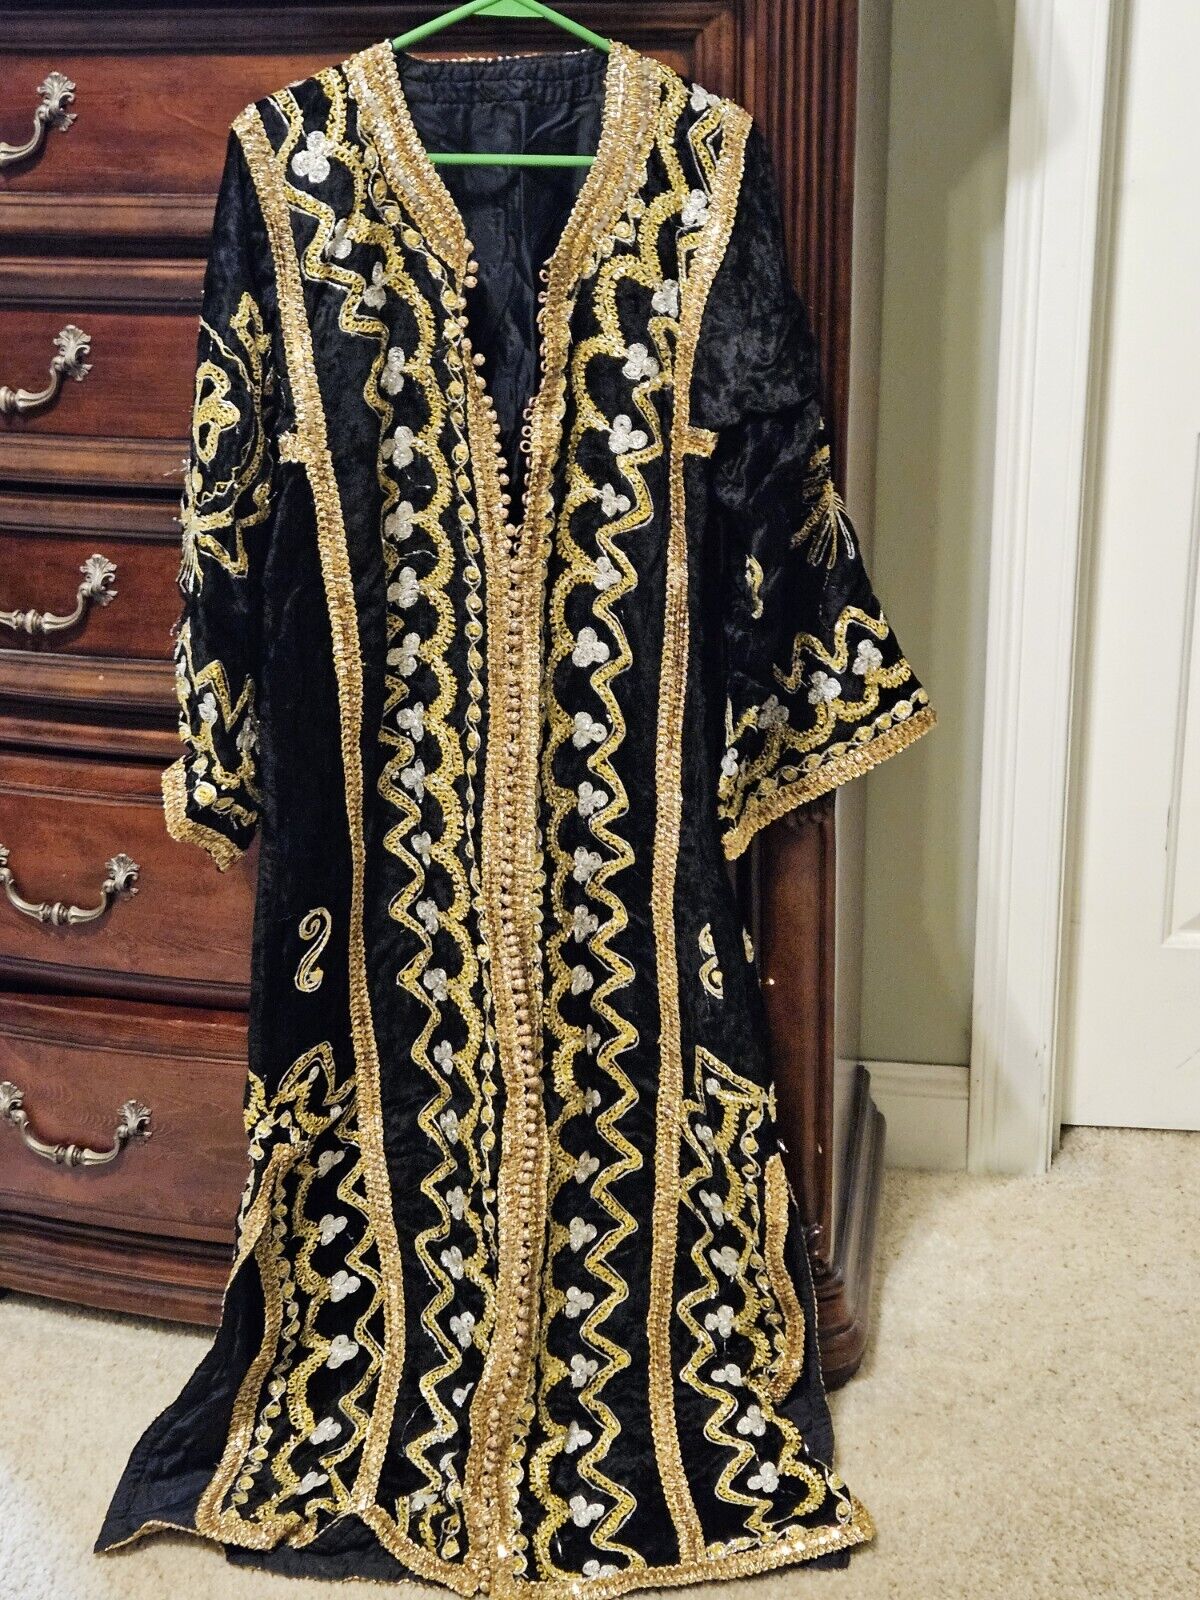 Antique ODD FELLOWS IOOF Victorian Ceremonial Lodge Long Robe Tunic and HAT Cap